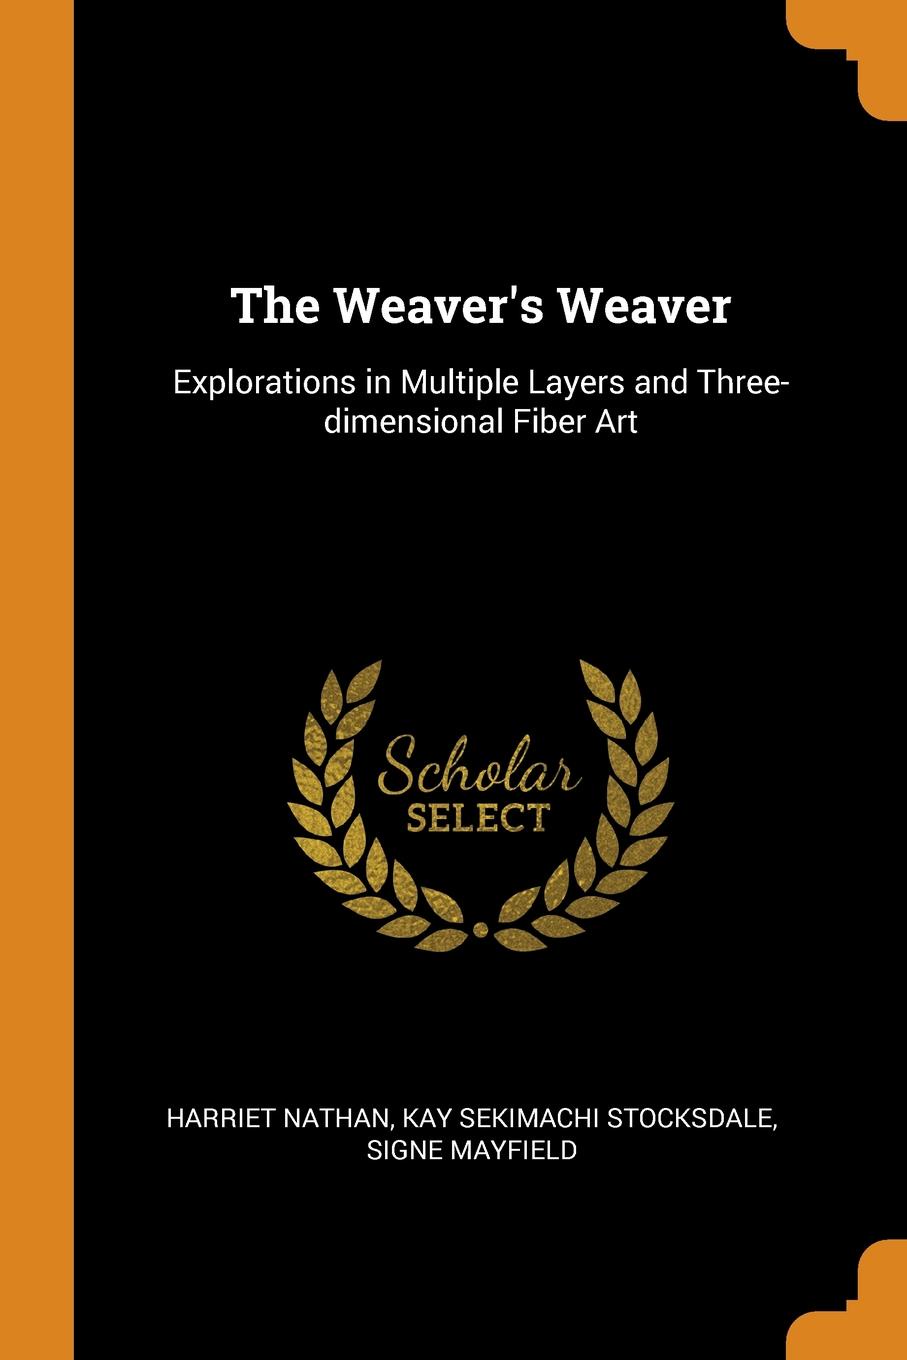 The Weaver.s Weaver. Explorations in Multiple Layers and Three-dimensional Fiber Art